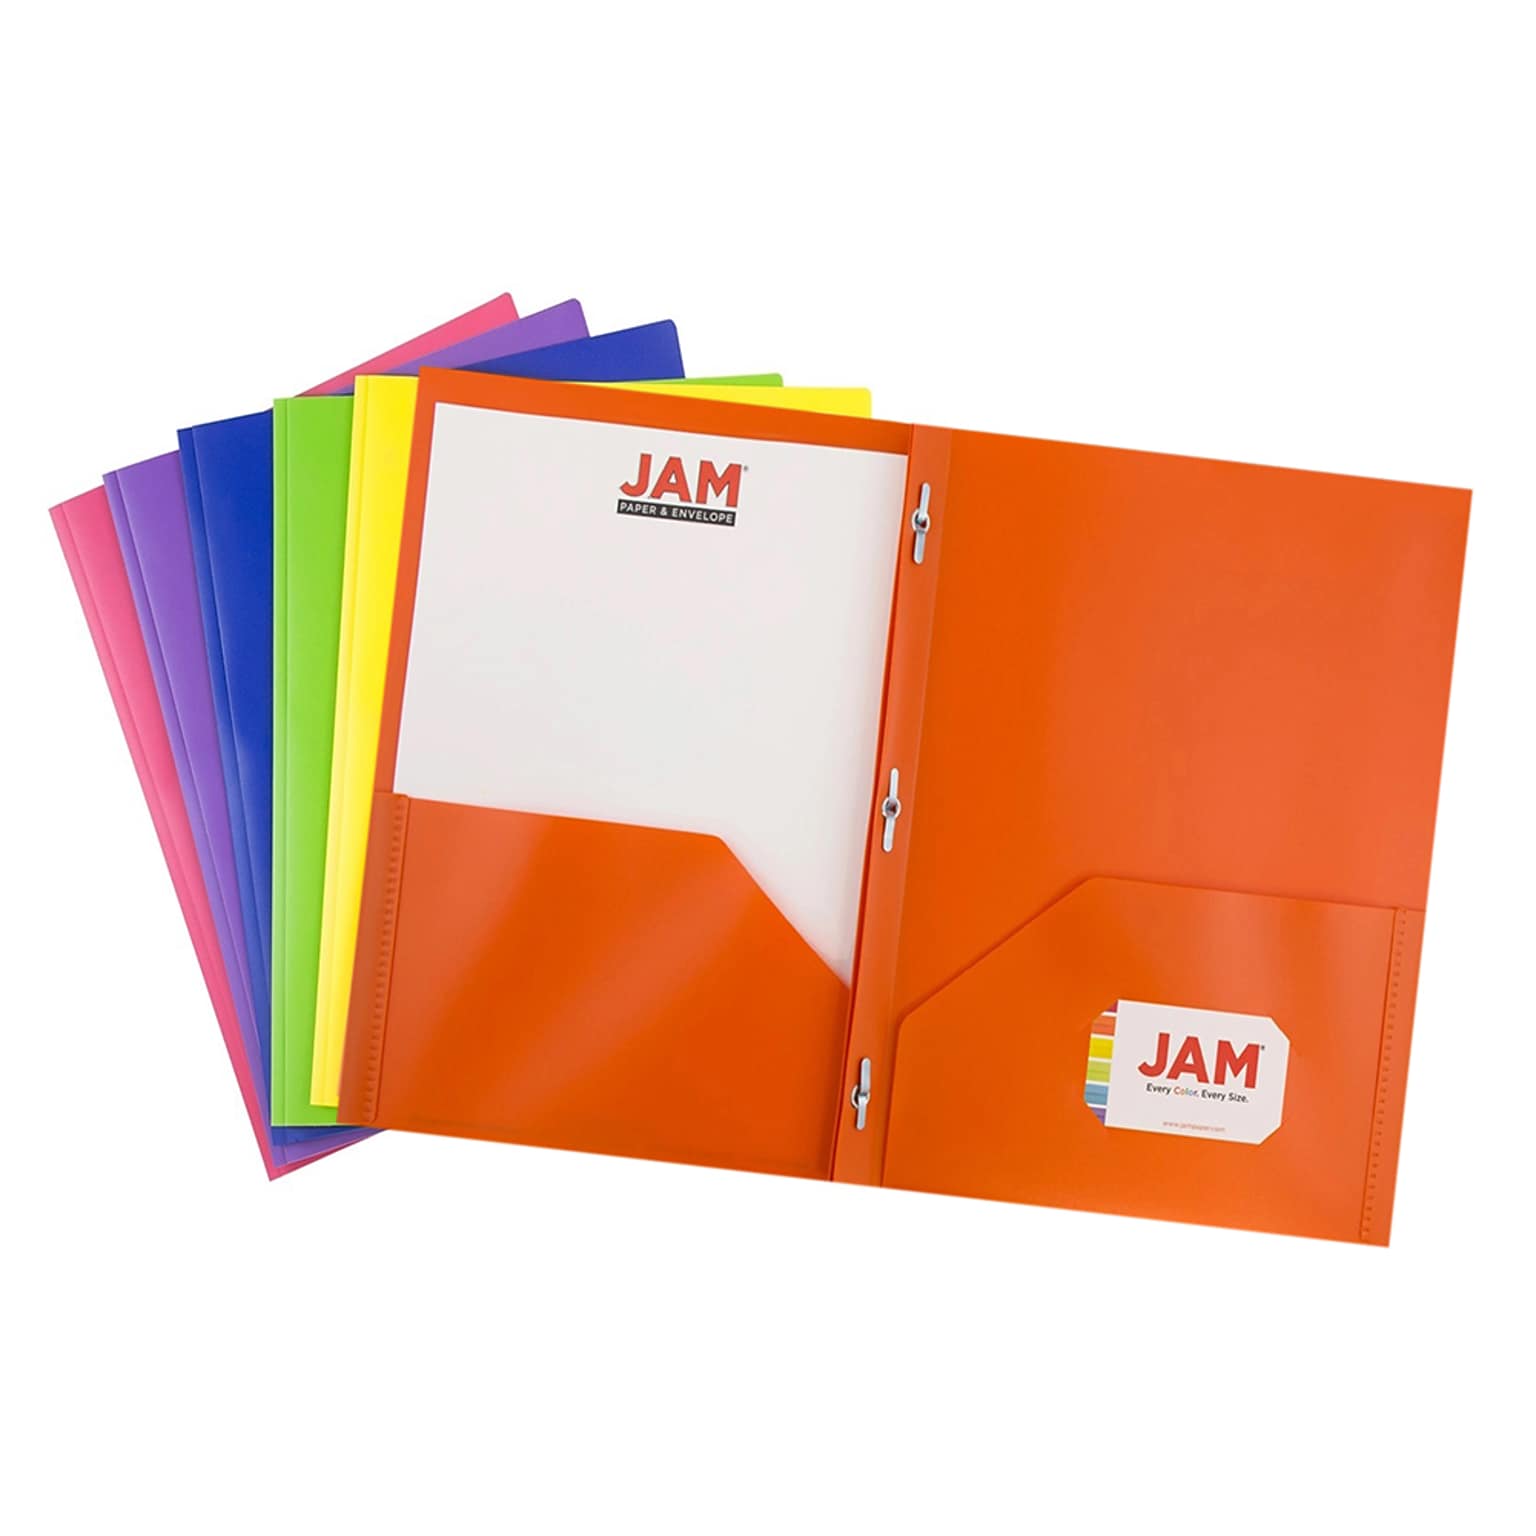 JAM Paper 2-Pocket Plastic Folders with Fastener Clasps, Multicolored, Assorted Primary Colors, 6/Pack (382ECbgypofu)